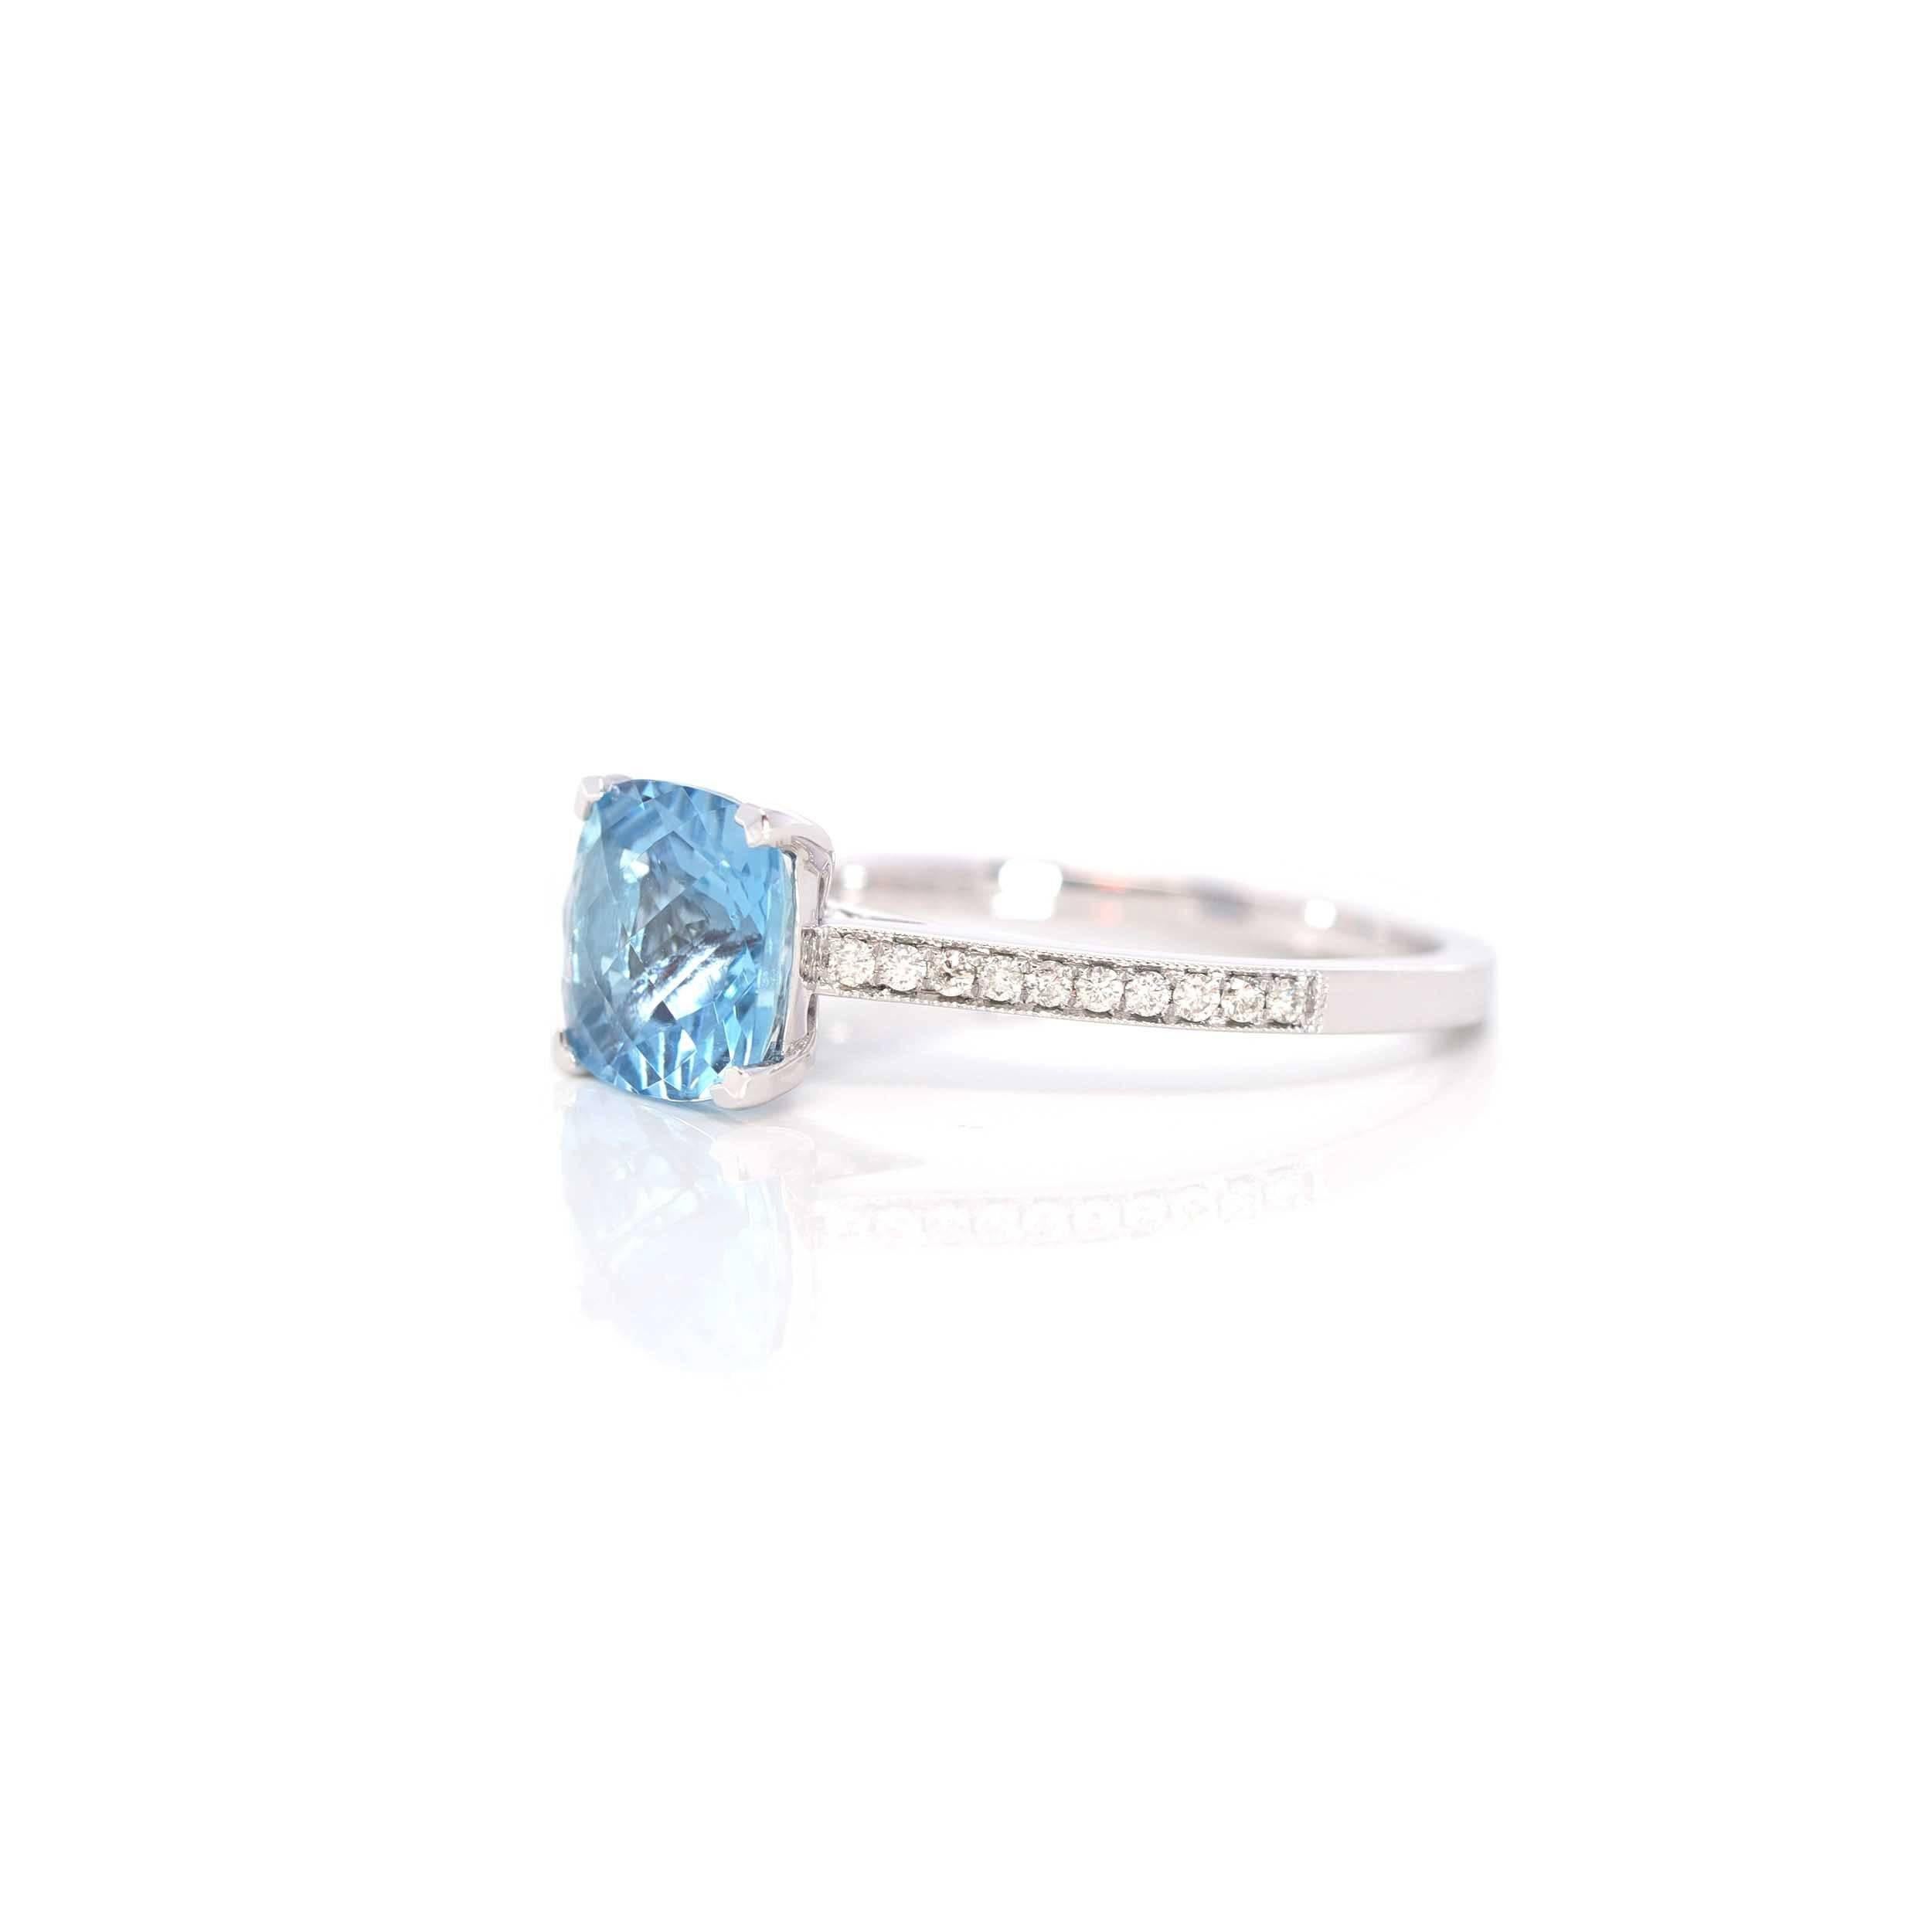 * Details--- This ring features a square natural 1.96 ct blue aquamarine. The design is simplistic with a halo style. The ring is very exquisite with a unique style. Baikalla artisans are dedicated to combining beautiful gemstones with modern-day